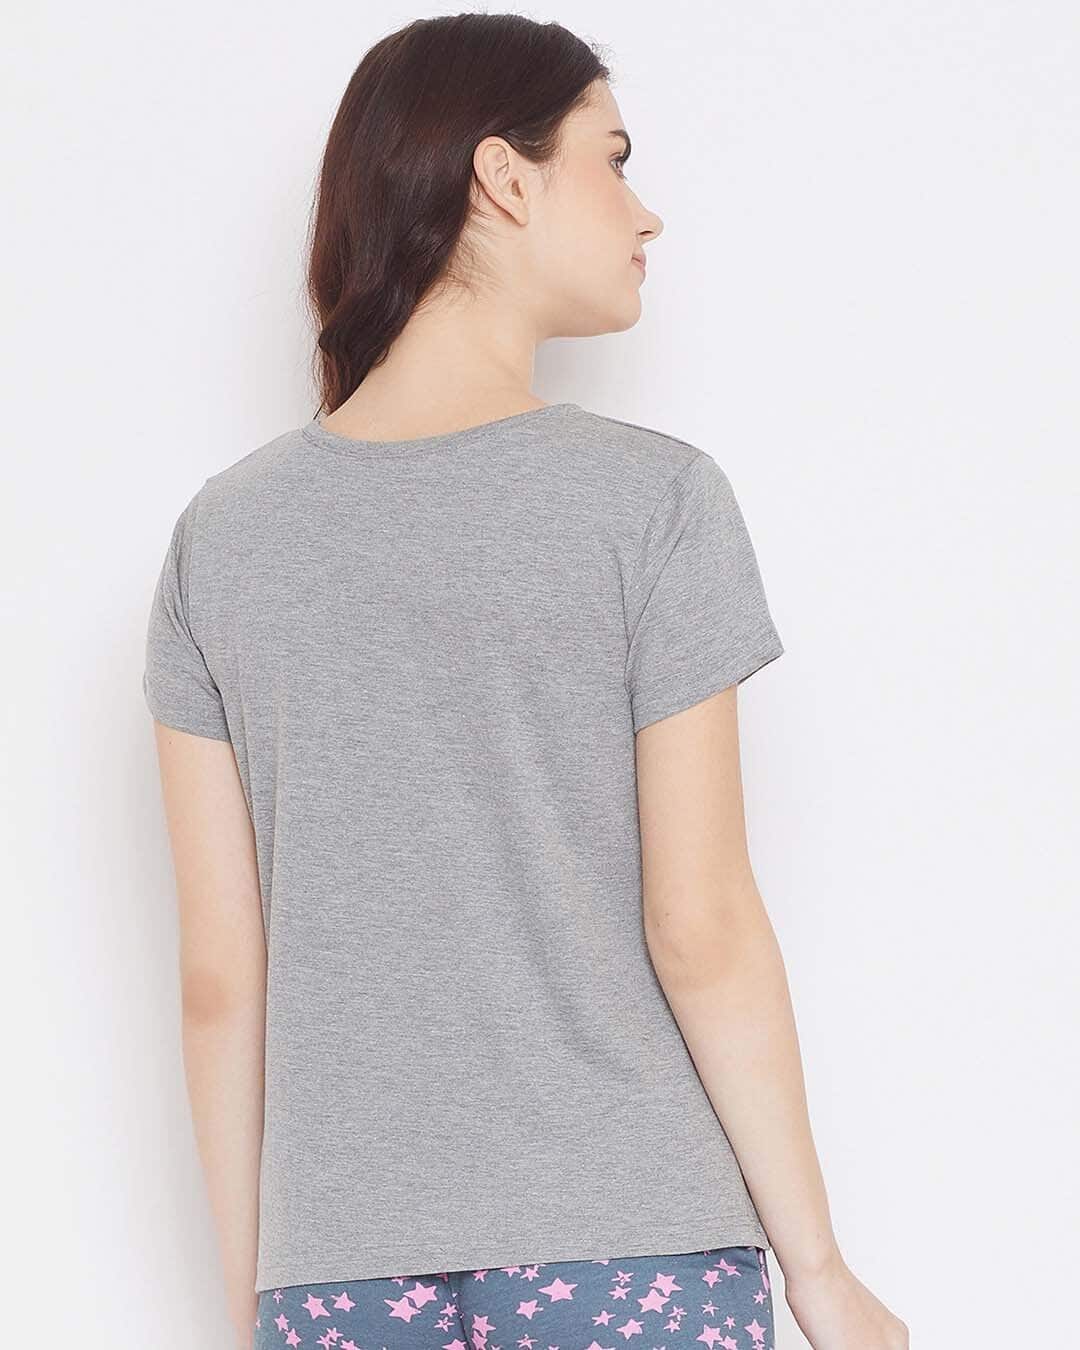 Shop Solid Sleep T-Shirt in Light Grey - Cotton Rich-Back